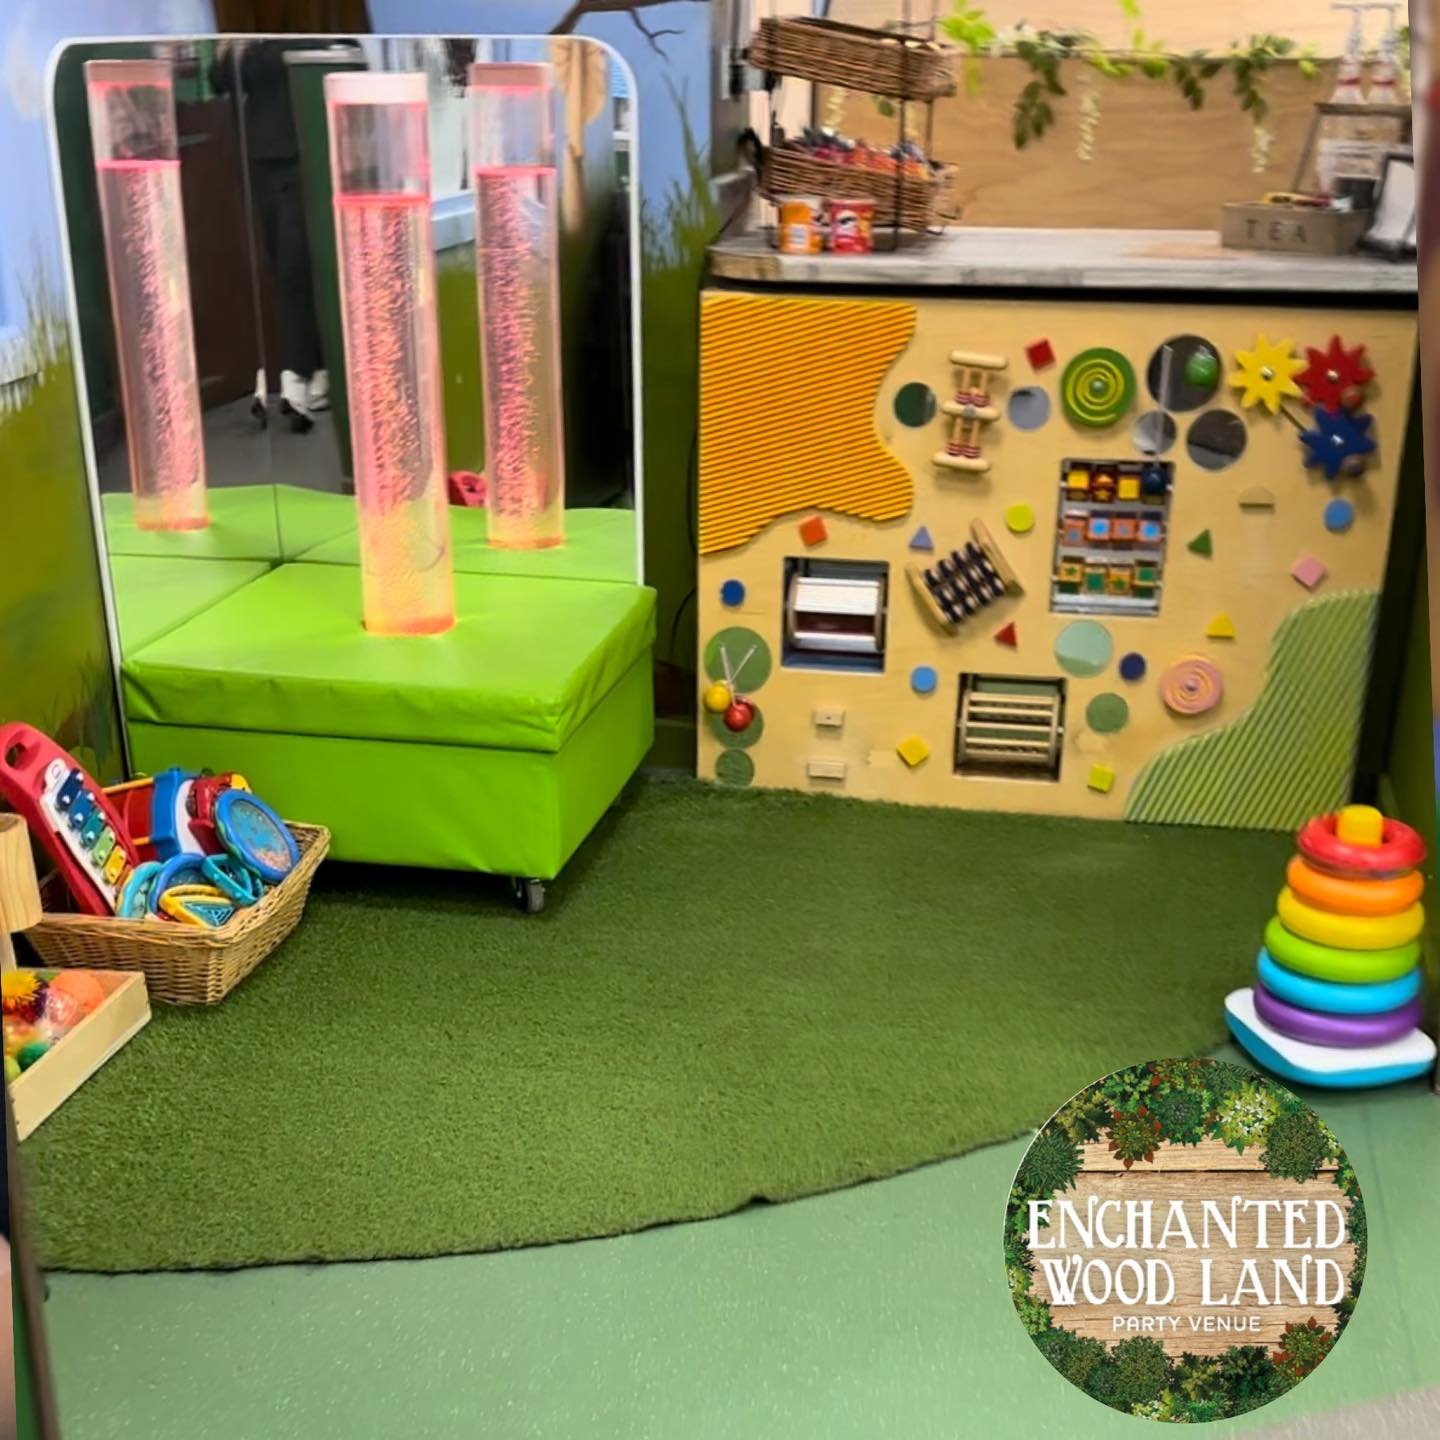 Sunday Fun-day! 🎉

Spaces to play today&hellip; 

Sunday 21st April 
9am- spaces
11am-limited 

📱 Book now: 

https://enchantedwood.bookmyparty.co.uk/book/1419/booking.aspx?packagegroup=stayplay

#enchantedwoodland #ewl #stayandplay #softplay #role